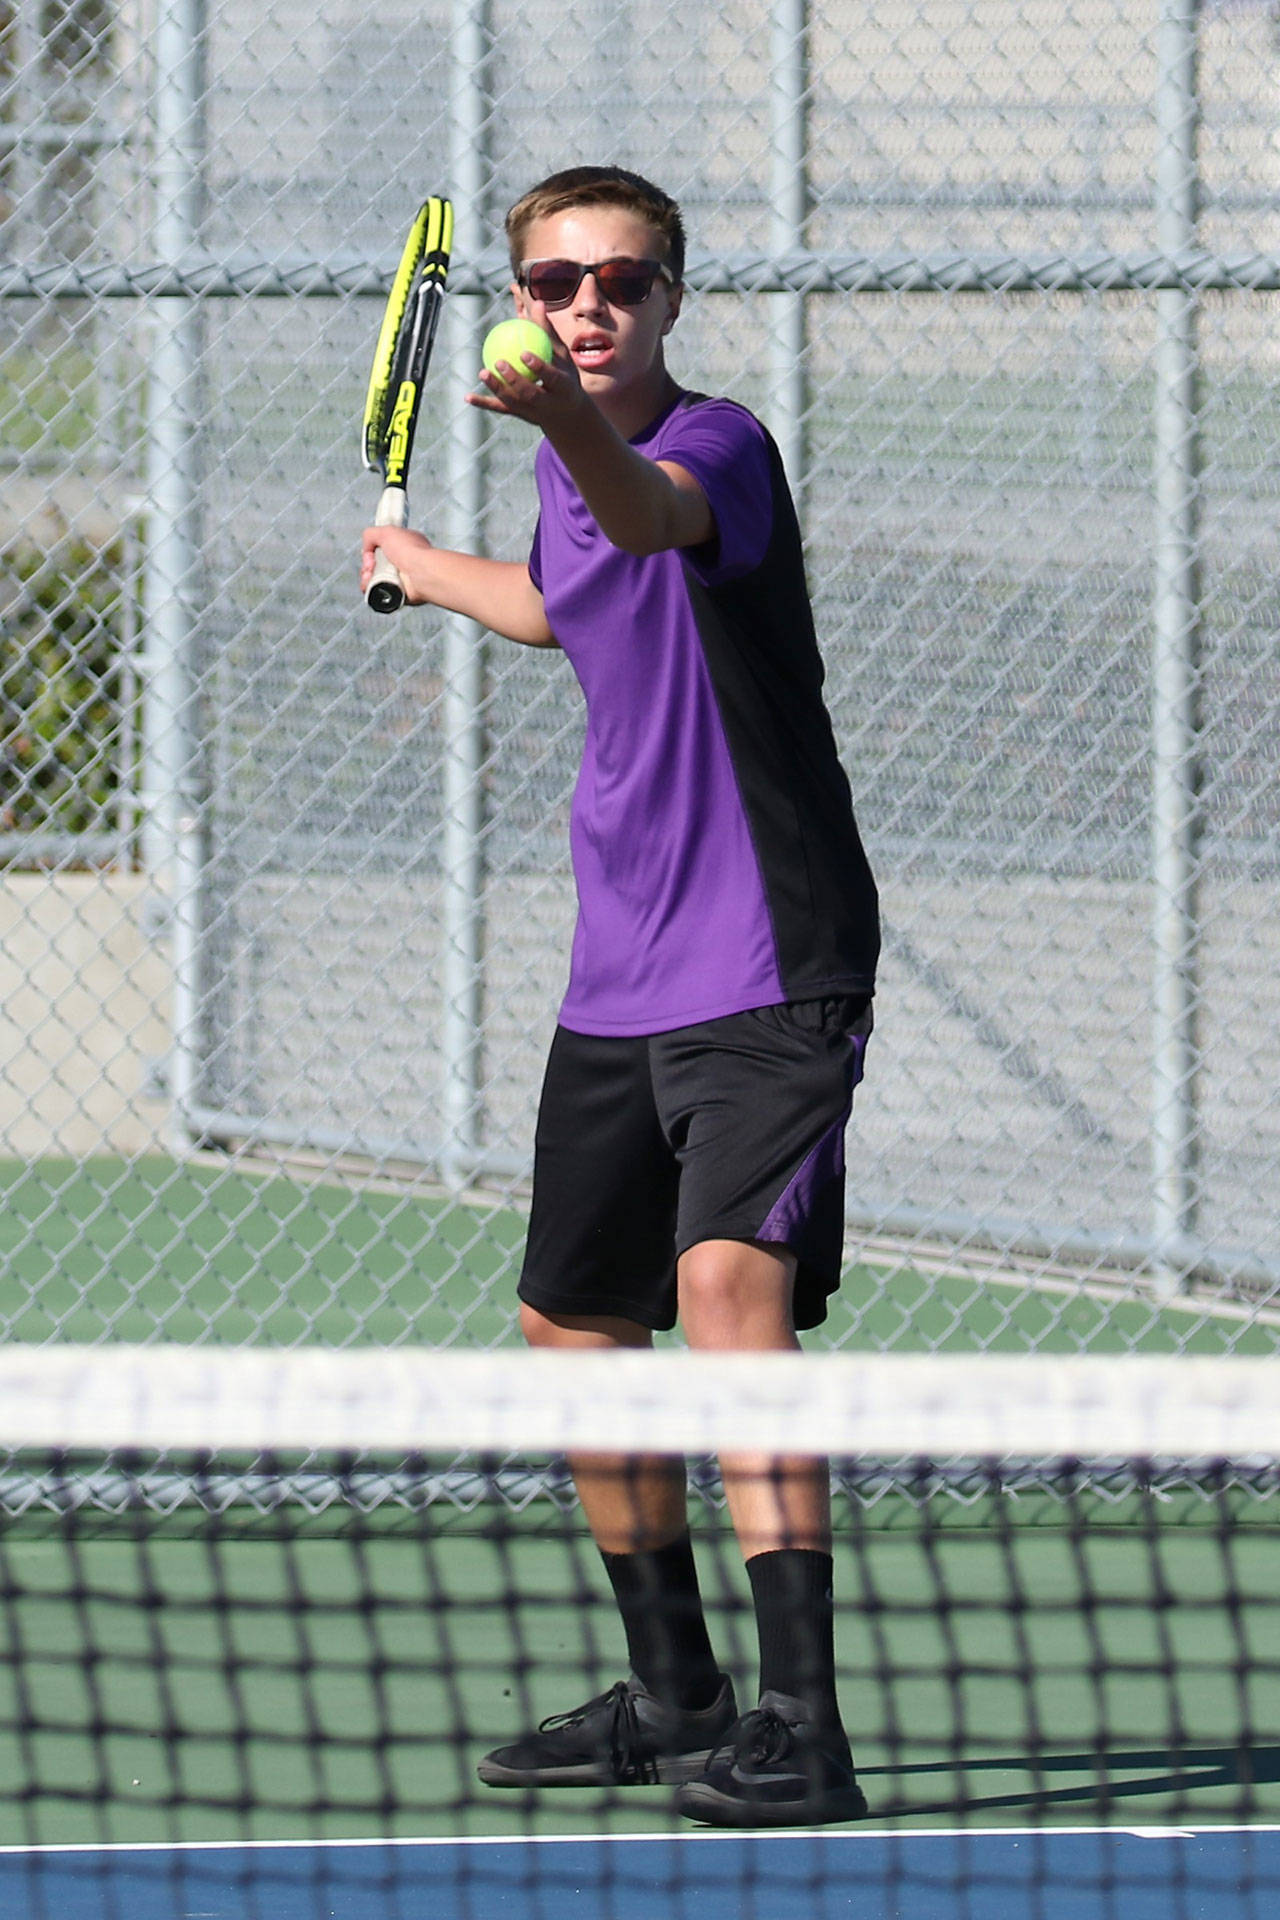 Ridgely Briddell prepares to serve in the second doubles match. (Photo by John Fisken)